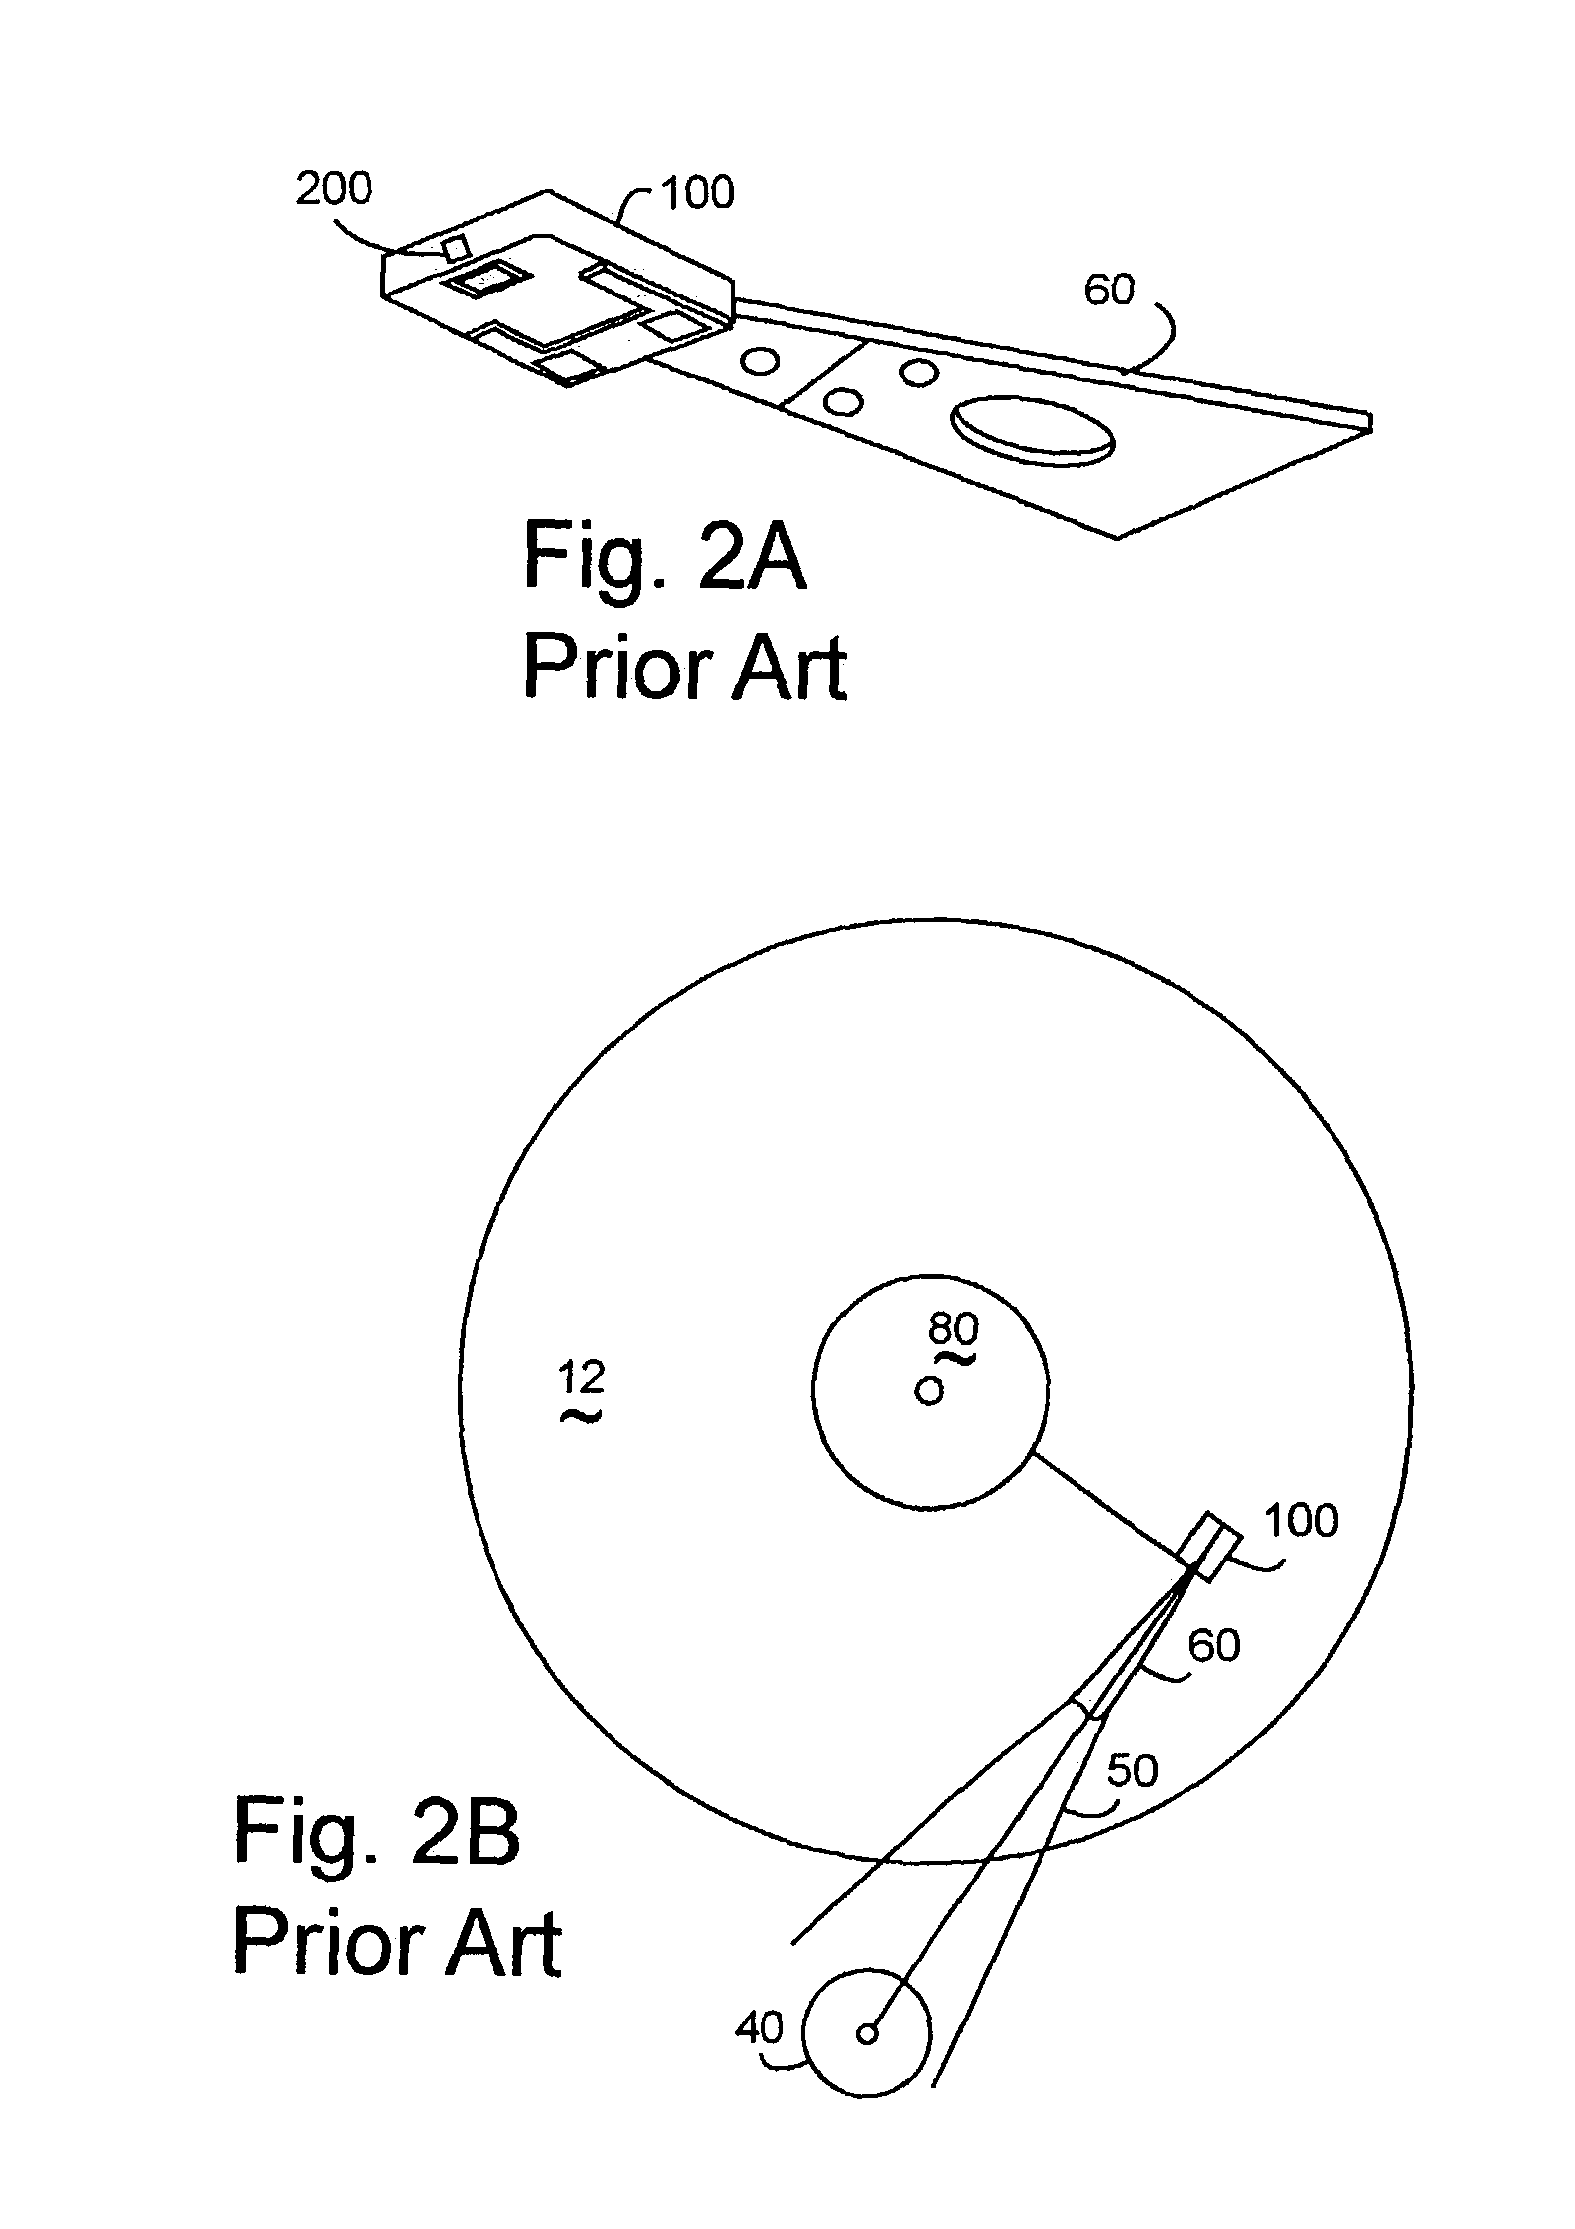 Methods and apparatus determining and/or using overshoot control of write current for optimized head write control in assembled disk drives